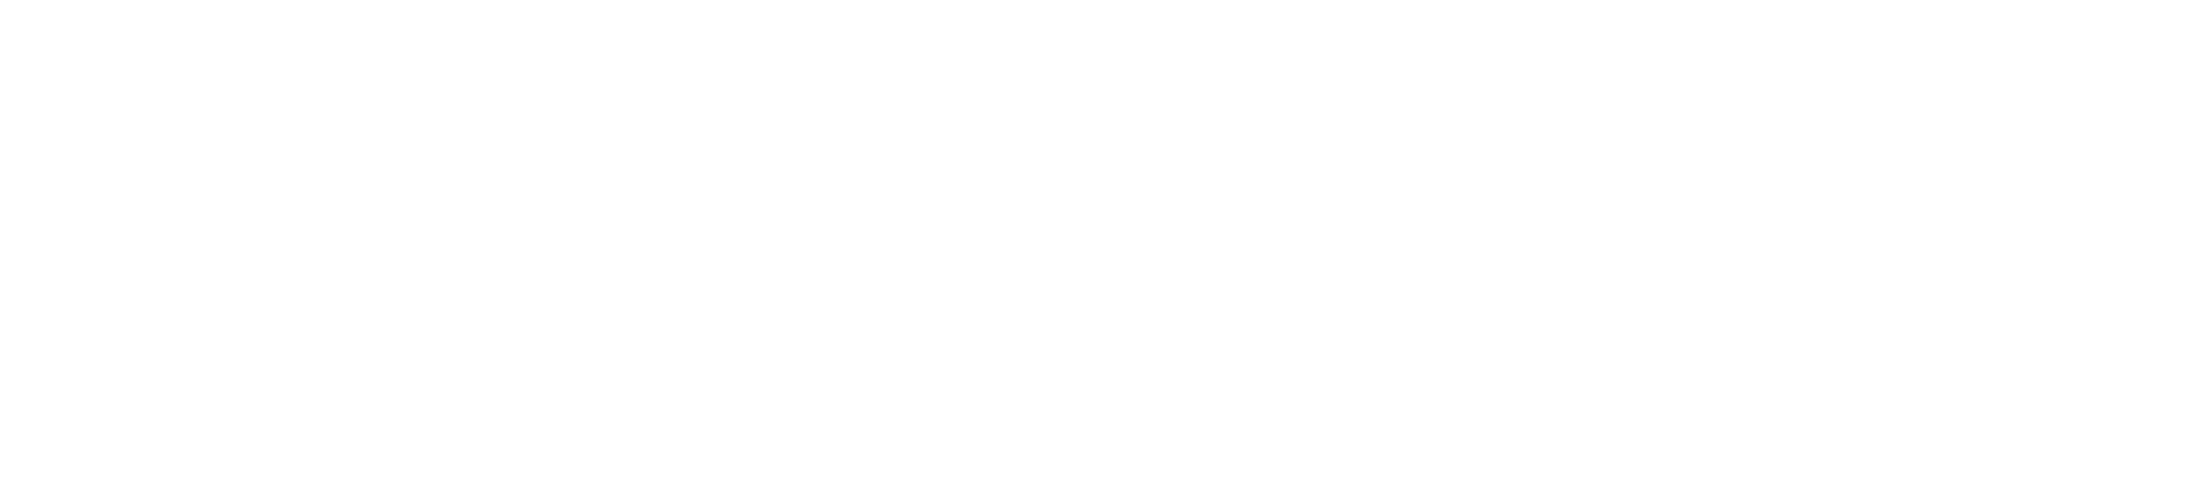 AskNicely-LogoWhite